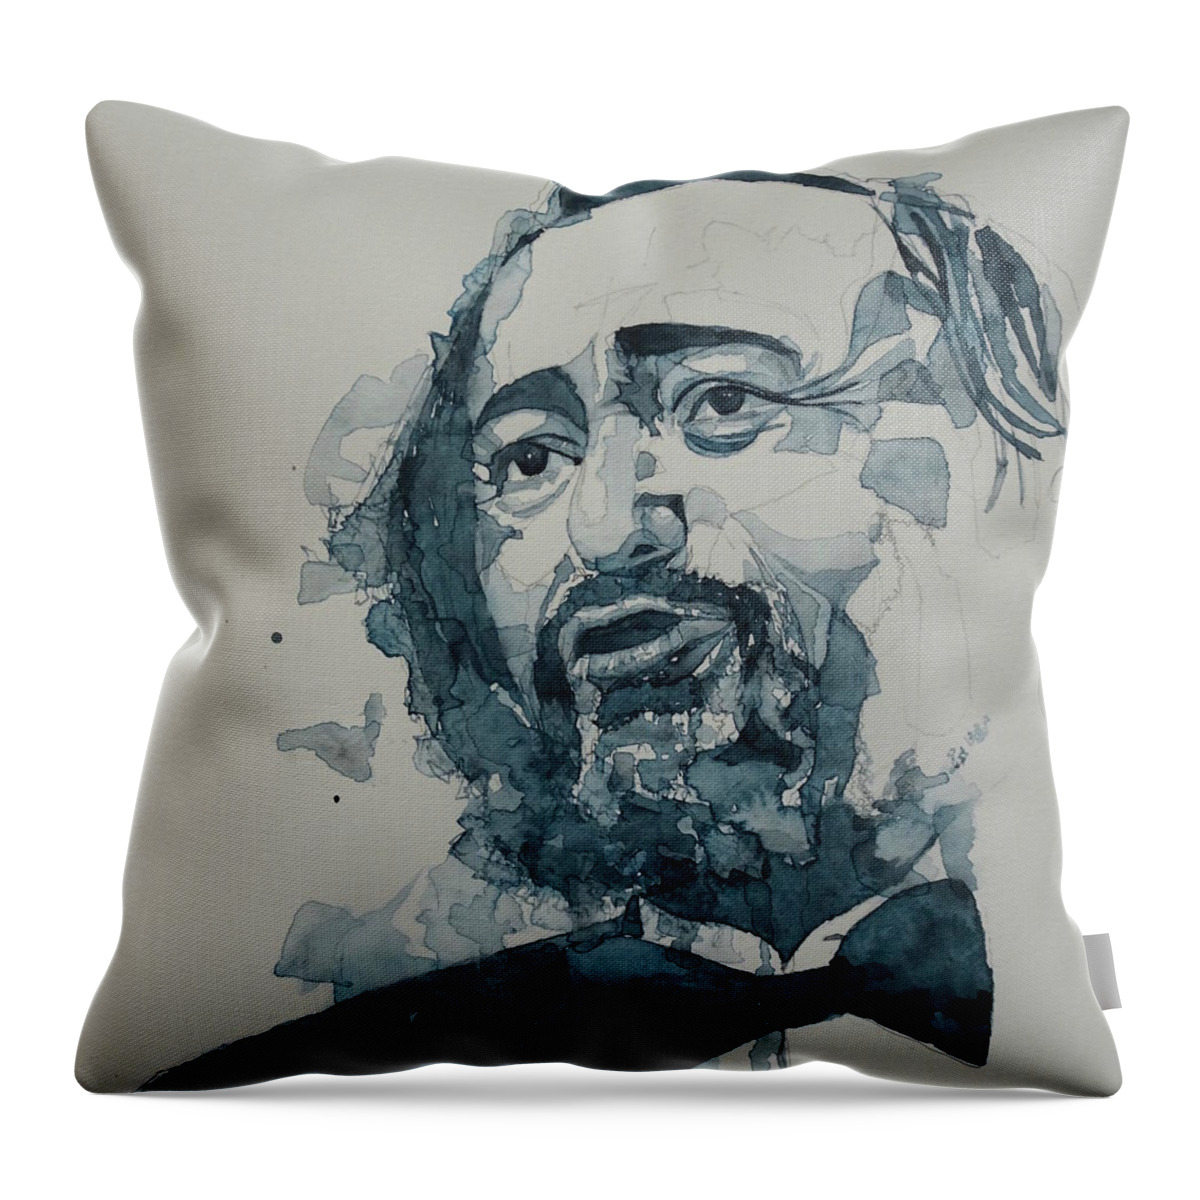 Luciano Pavarotti Throw Pillow featuring the painting Luciano Pavarotti by Paul Lovering